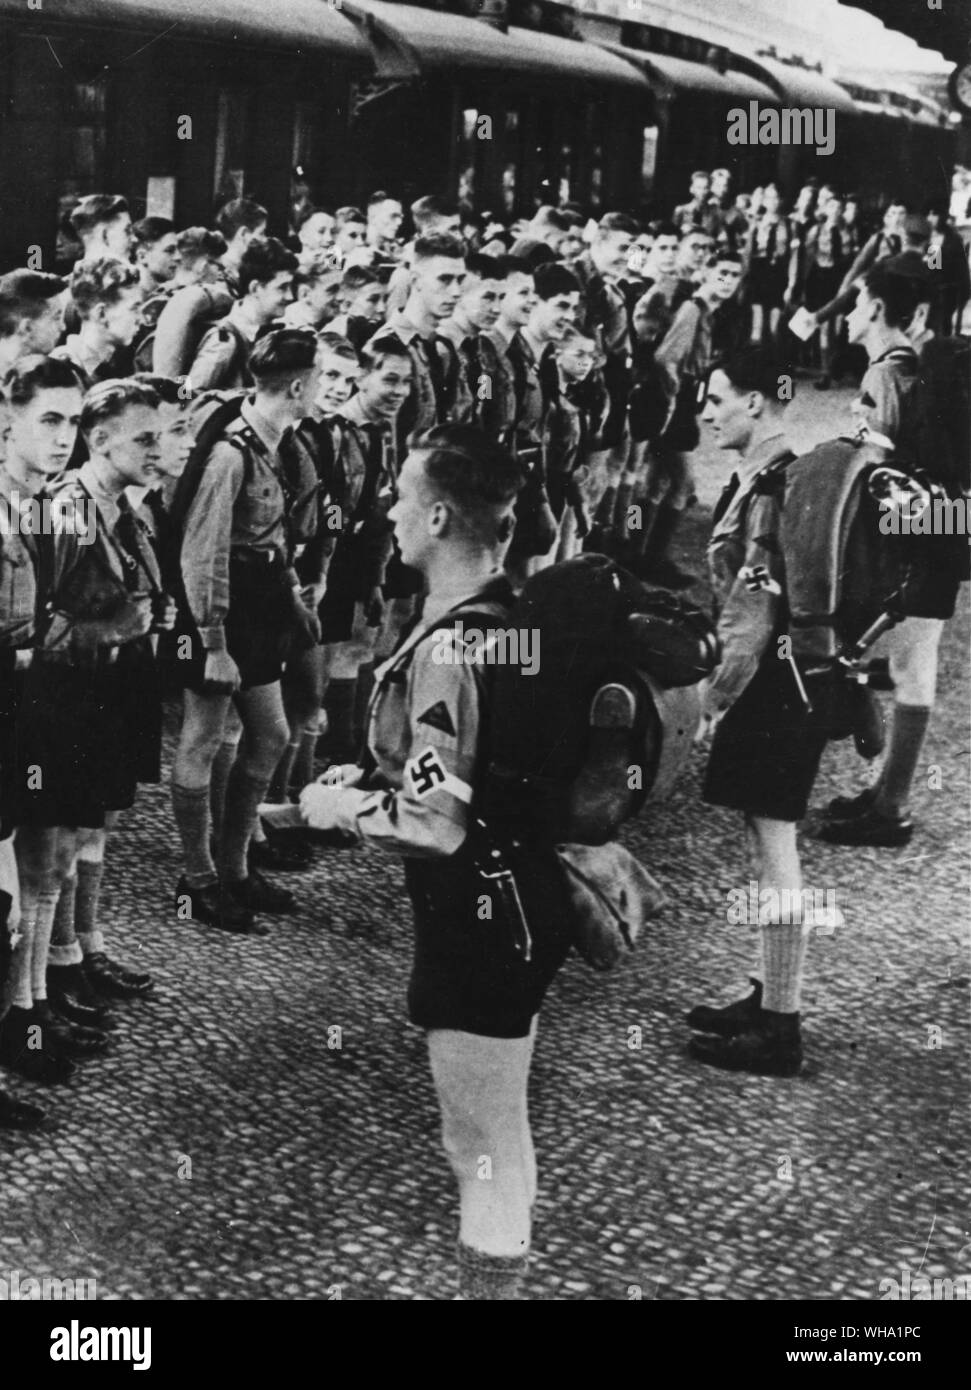 WW2: Young German boys become a part of the Nazi Party - in the Hitler Jugond (Hitler Youth), a Nazi sponsored youth scheme. Compulsory labour and military service were established after the party obtained supreme power in Germany. Stock Photo